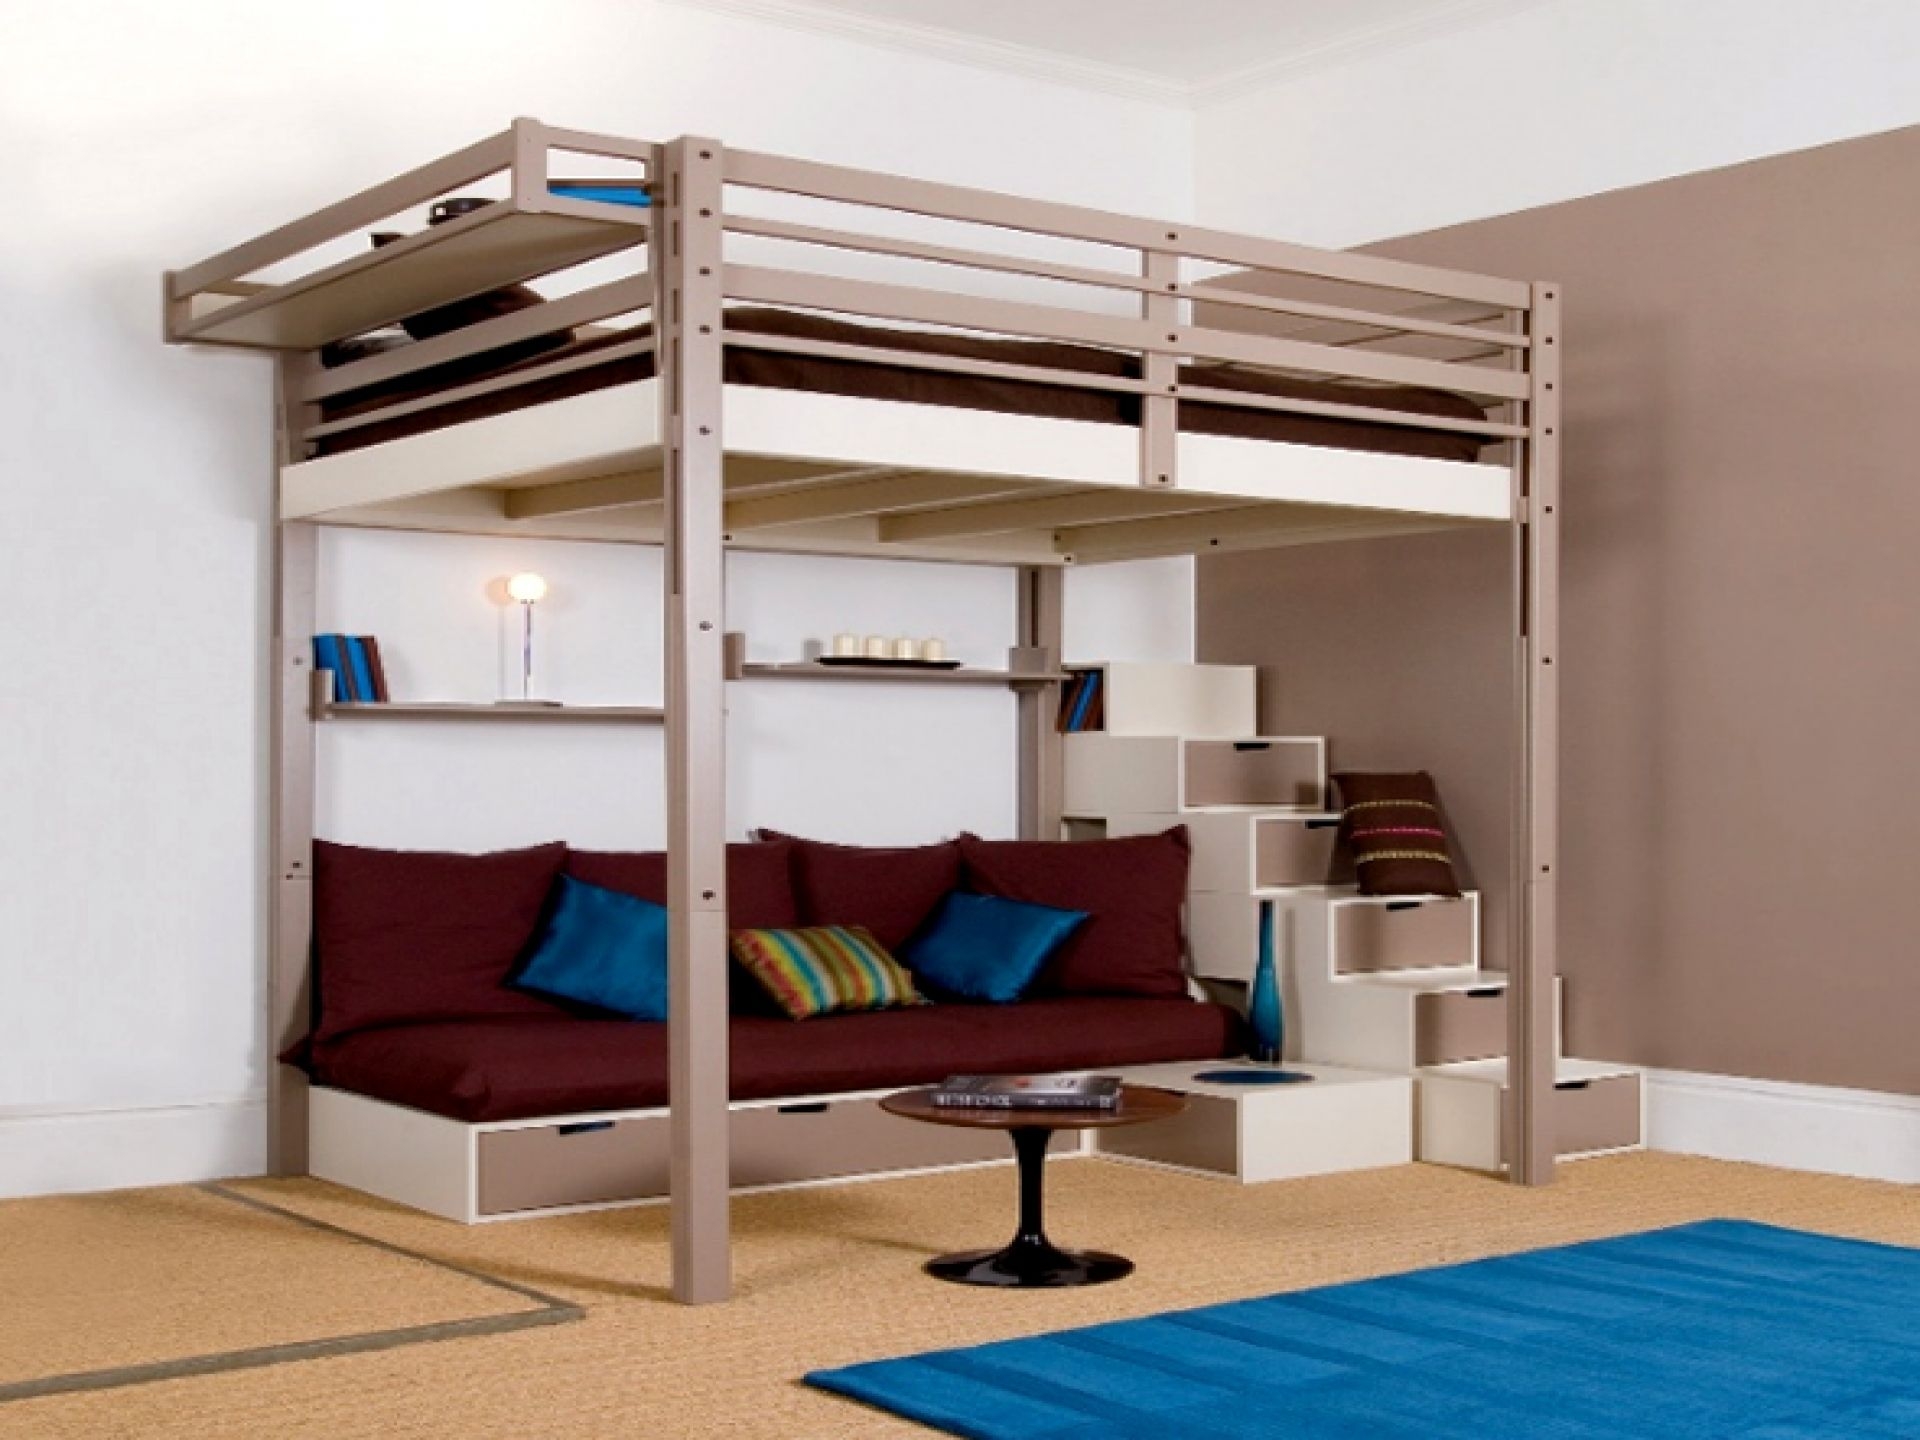 Full Size Loft Bed With Stairs Visualhunt, How To Build A Full Size Loft Bed With Stairs